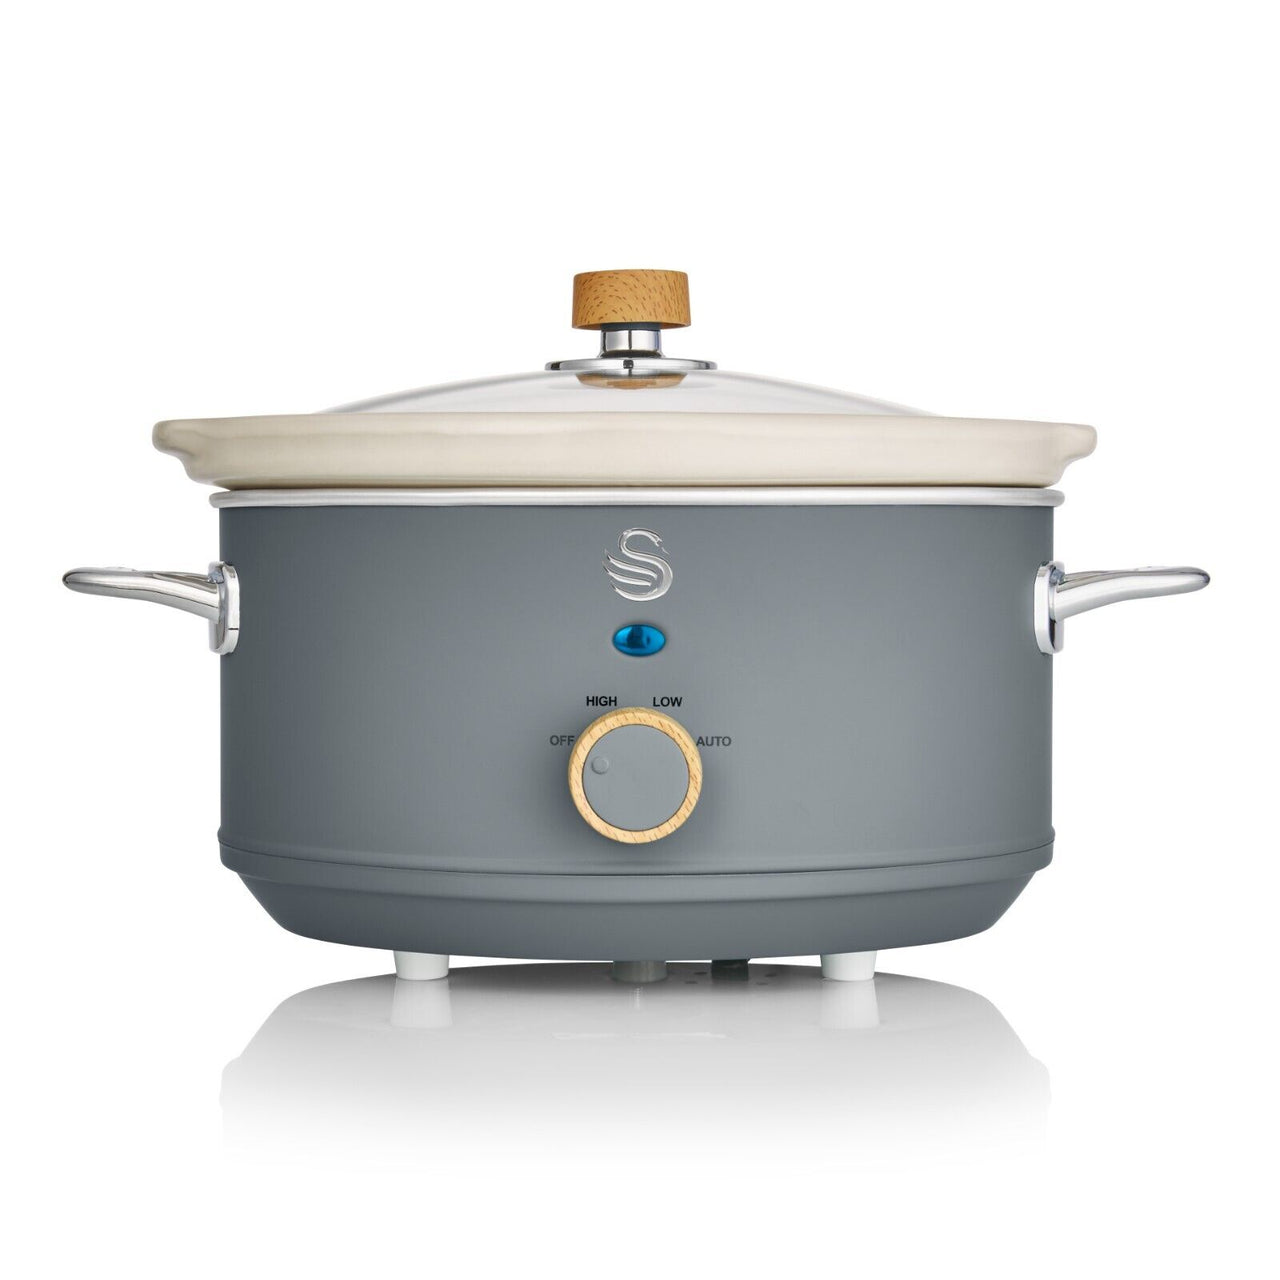 Swan Nordic Grey Slow Cooker Scandi Design Large 3.5L Capacity with 3 Heat Settings